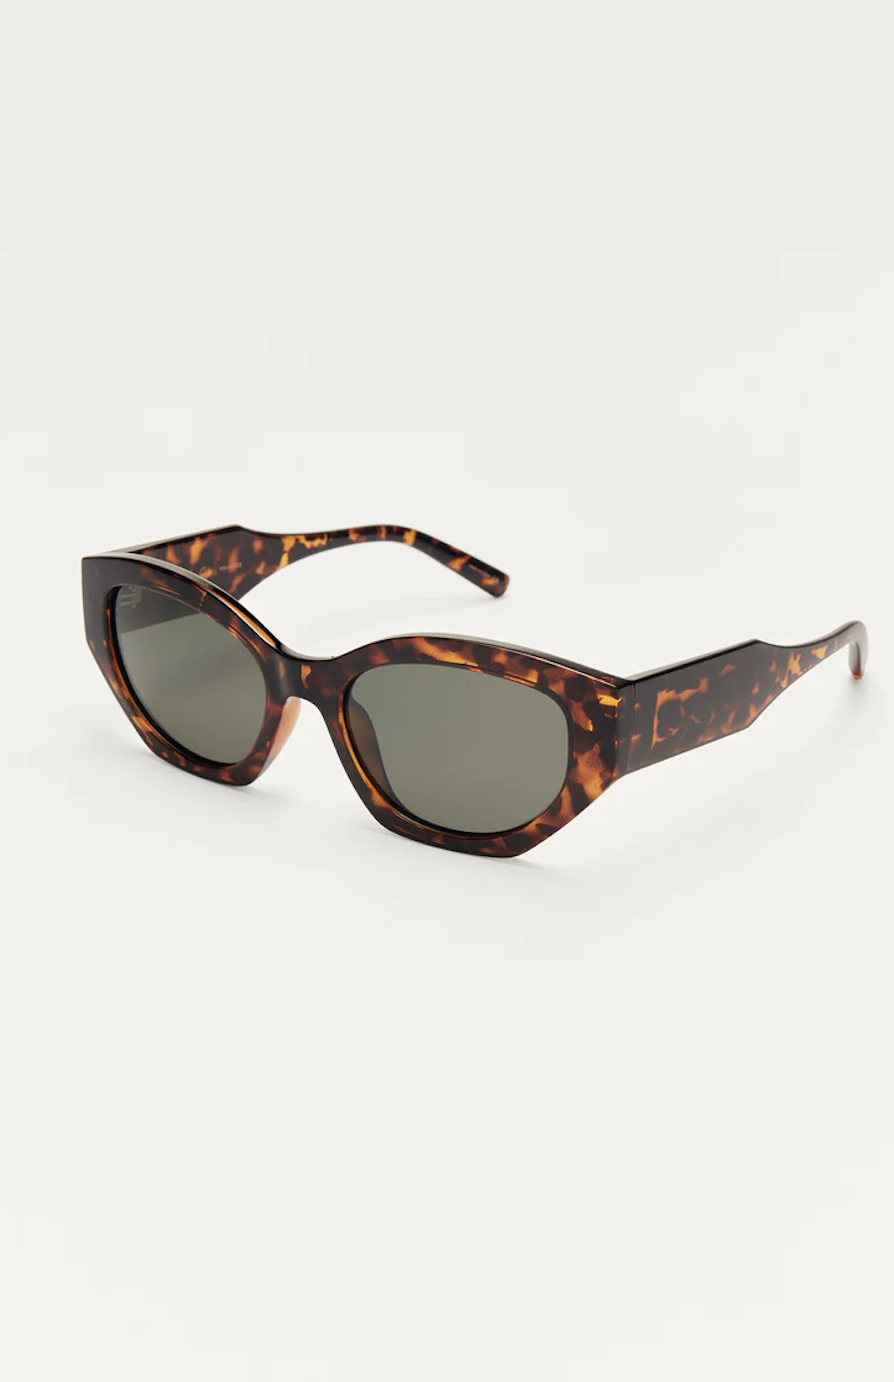 Z SUPPLY LOVE SICK SUNGLASSES IN BROWN TORTOISE AND GREY